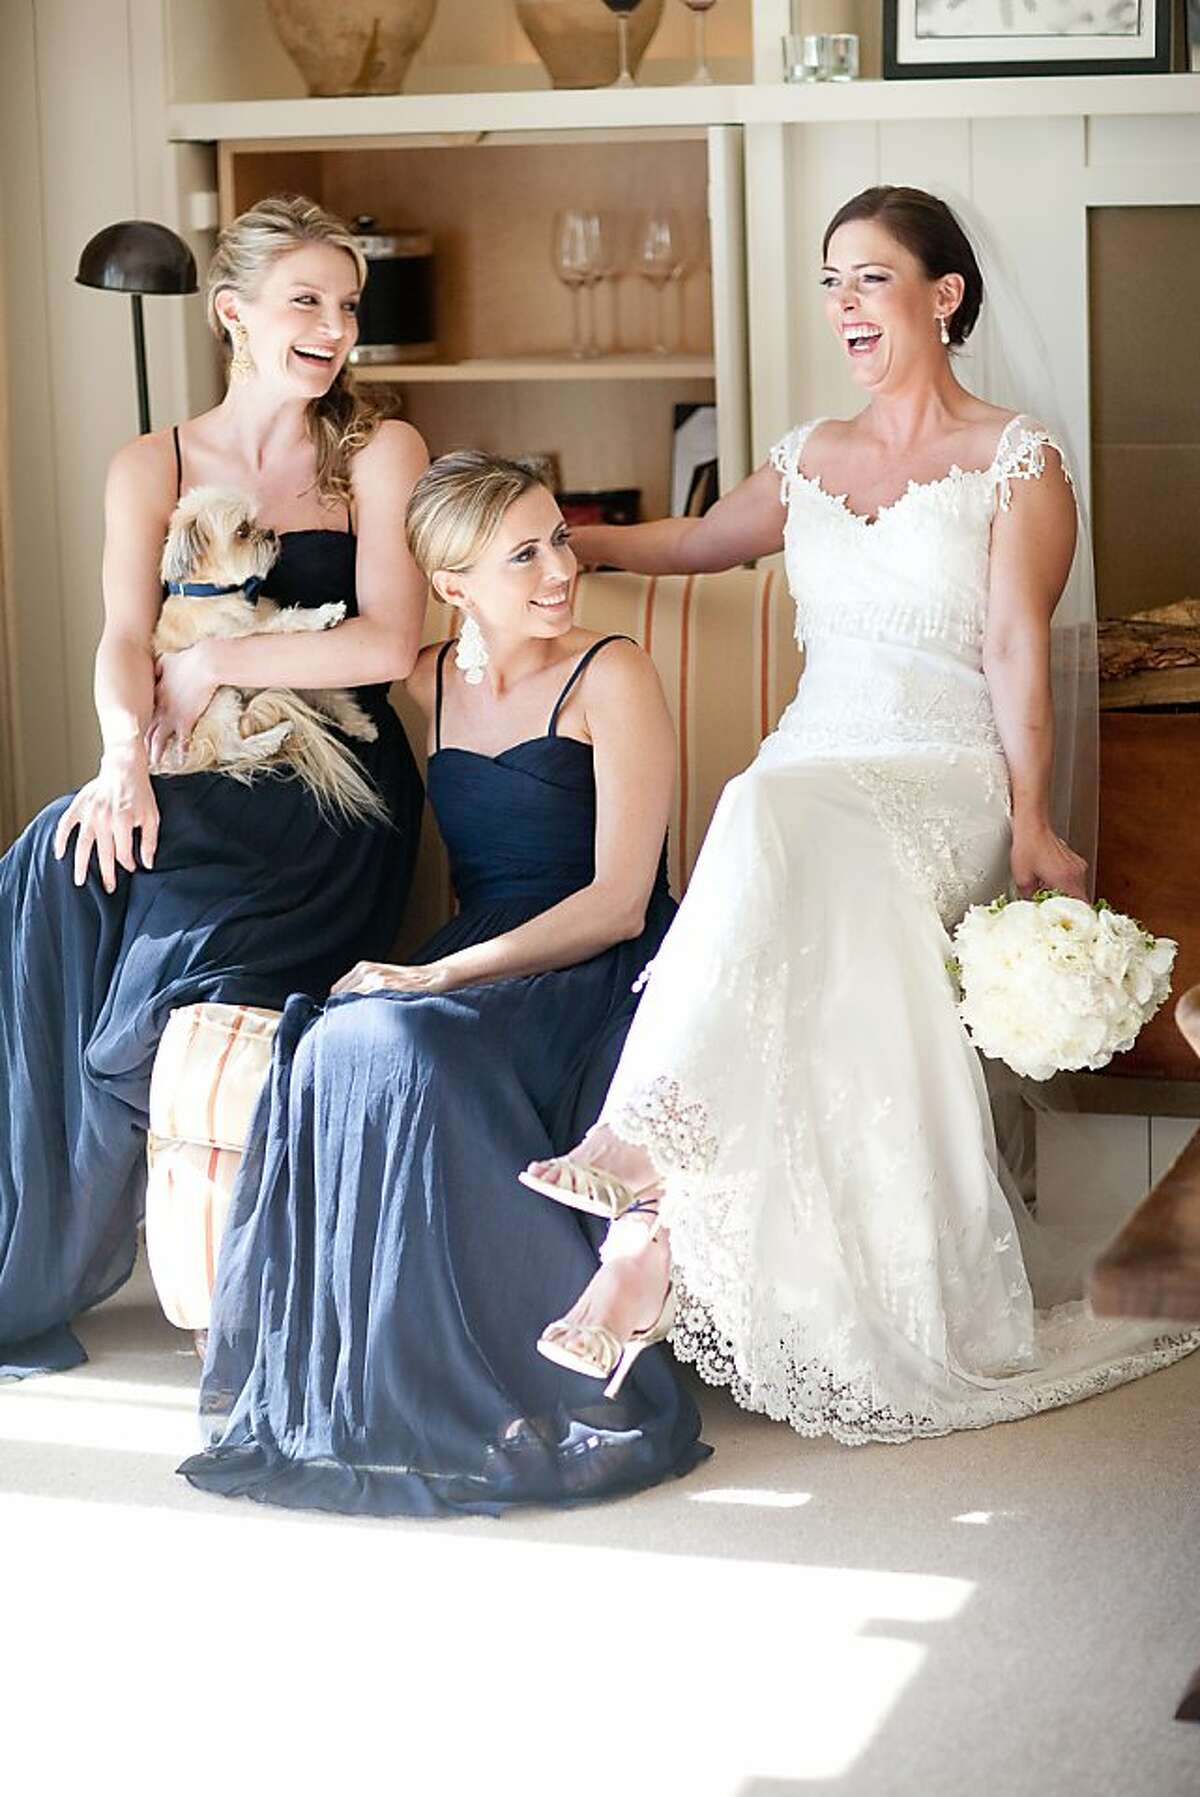 The bride and her bridesmaids Kristy Caylor (Maiyet president and founder) and Katherine Cooper at the Poetry Inn.